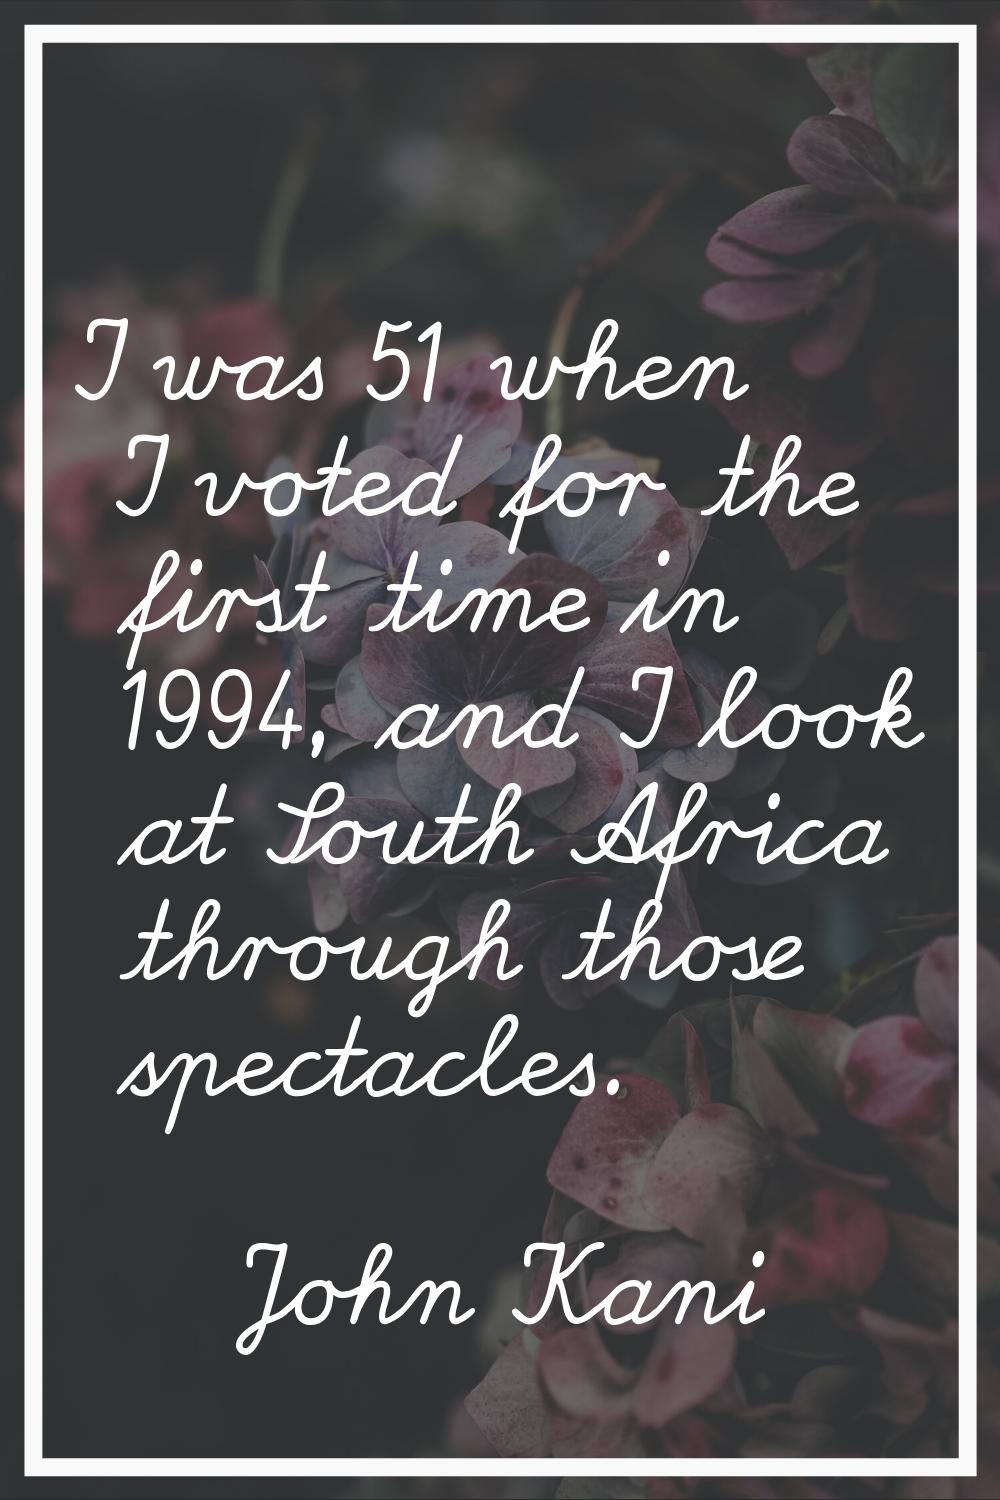 I was 51 when I voted for the first time in 1994, and I look at South Africa through those spectacl